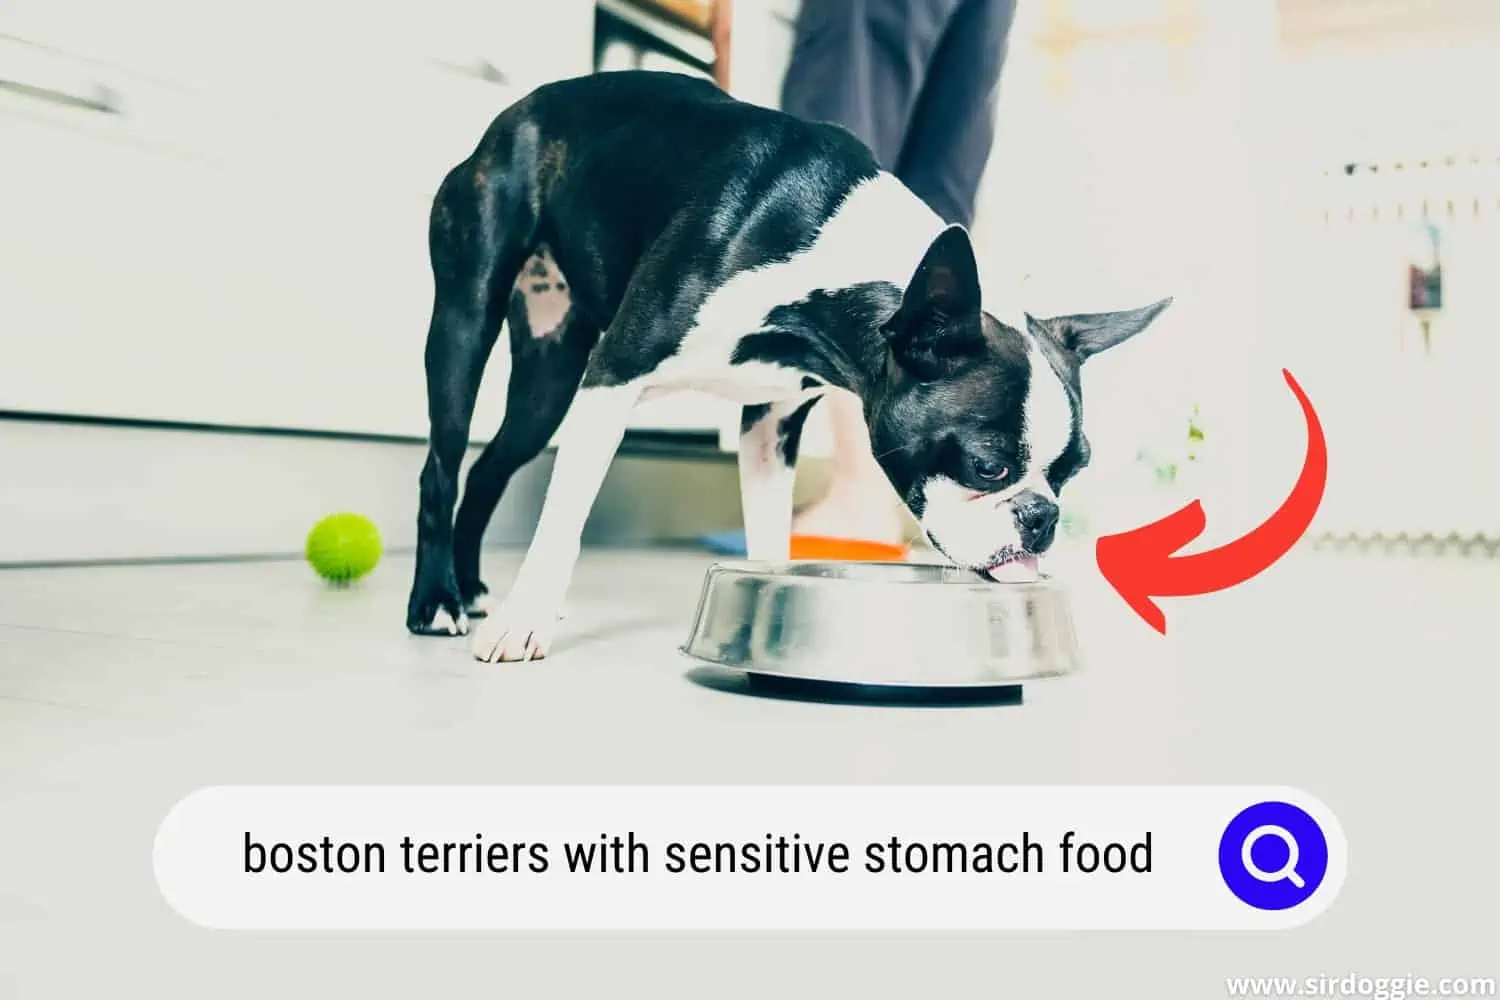 A Boston Terrier dog with sensitive stomach eating food